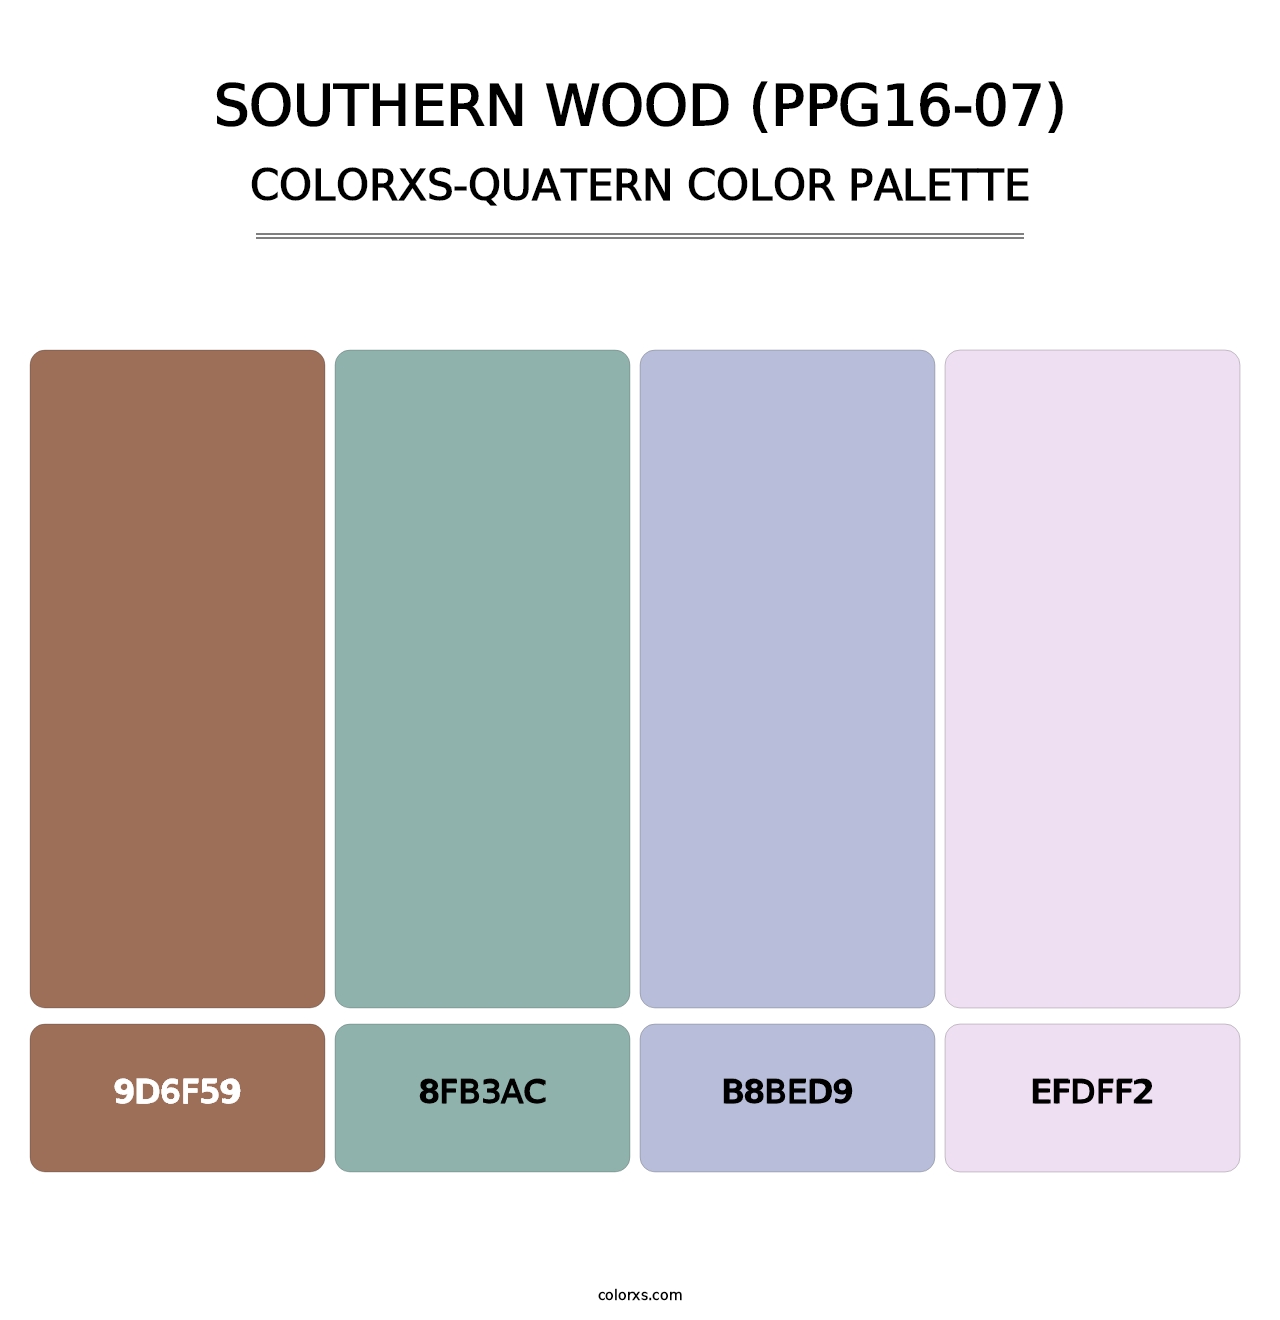 Southern Wood (PPG16-07) - Colorxs Quatern Palette